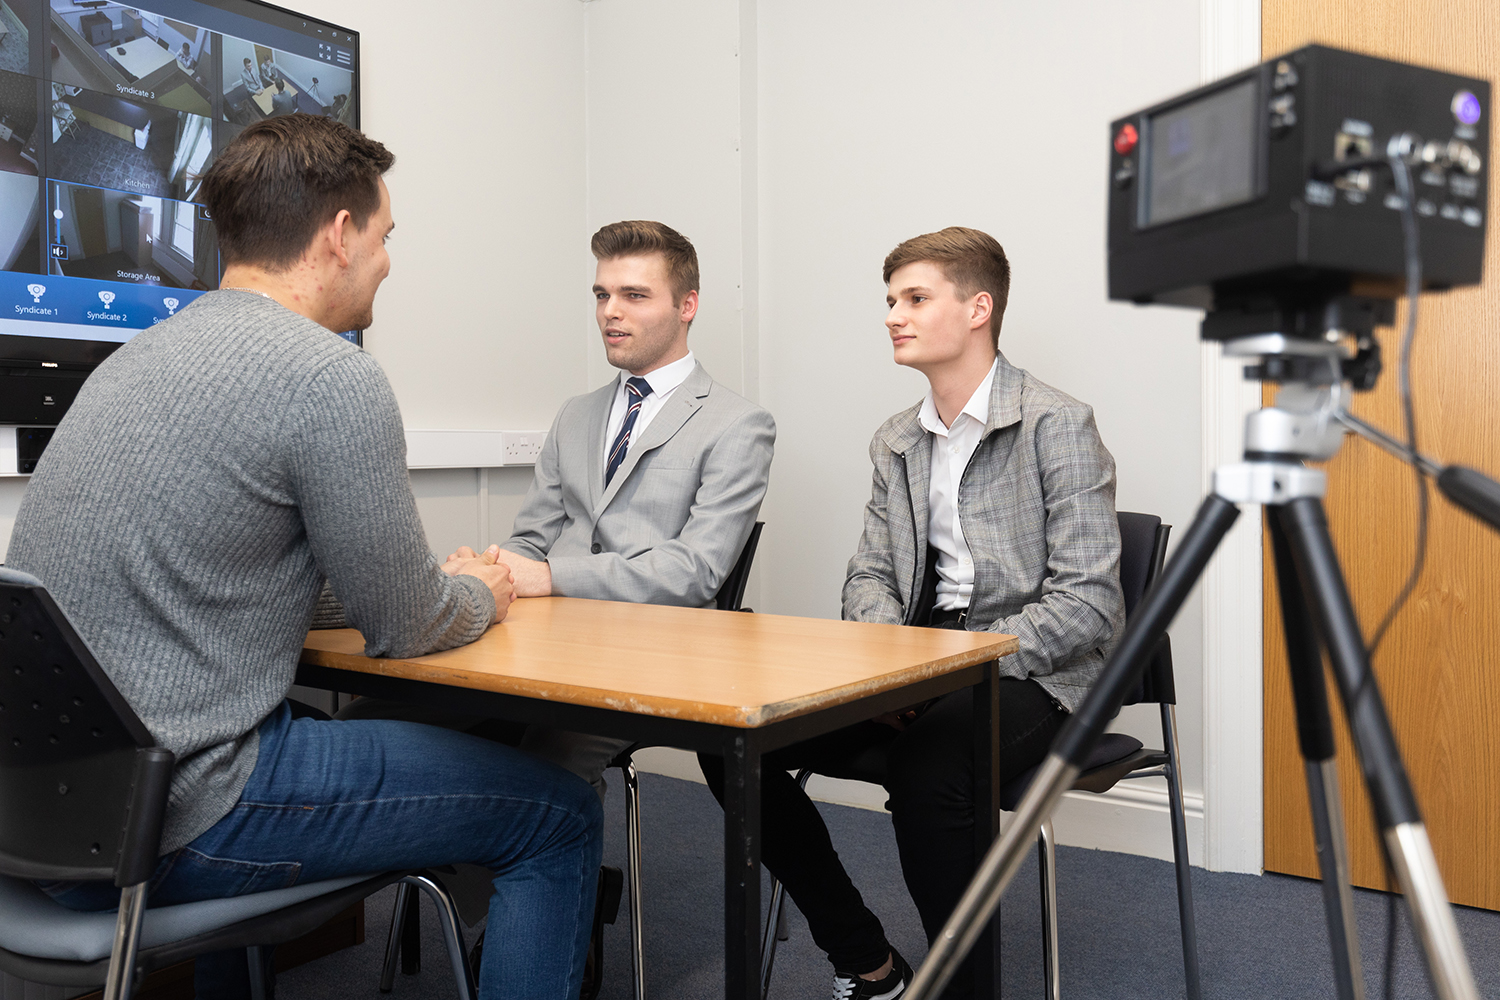 Students practice their interrogation skills in the EHU Police Training and Simulation Facility.